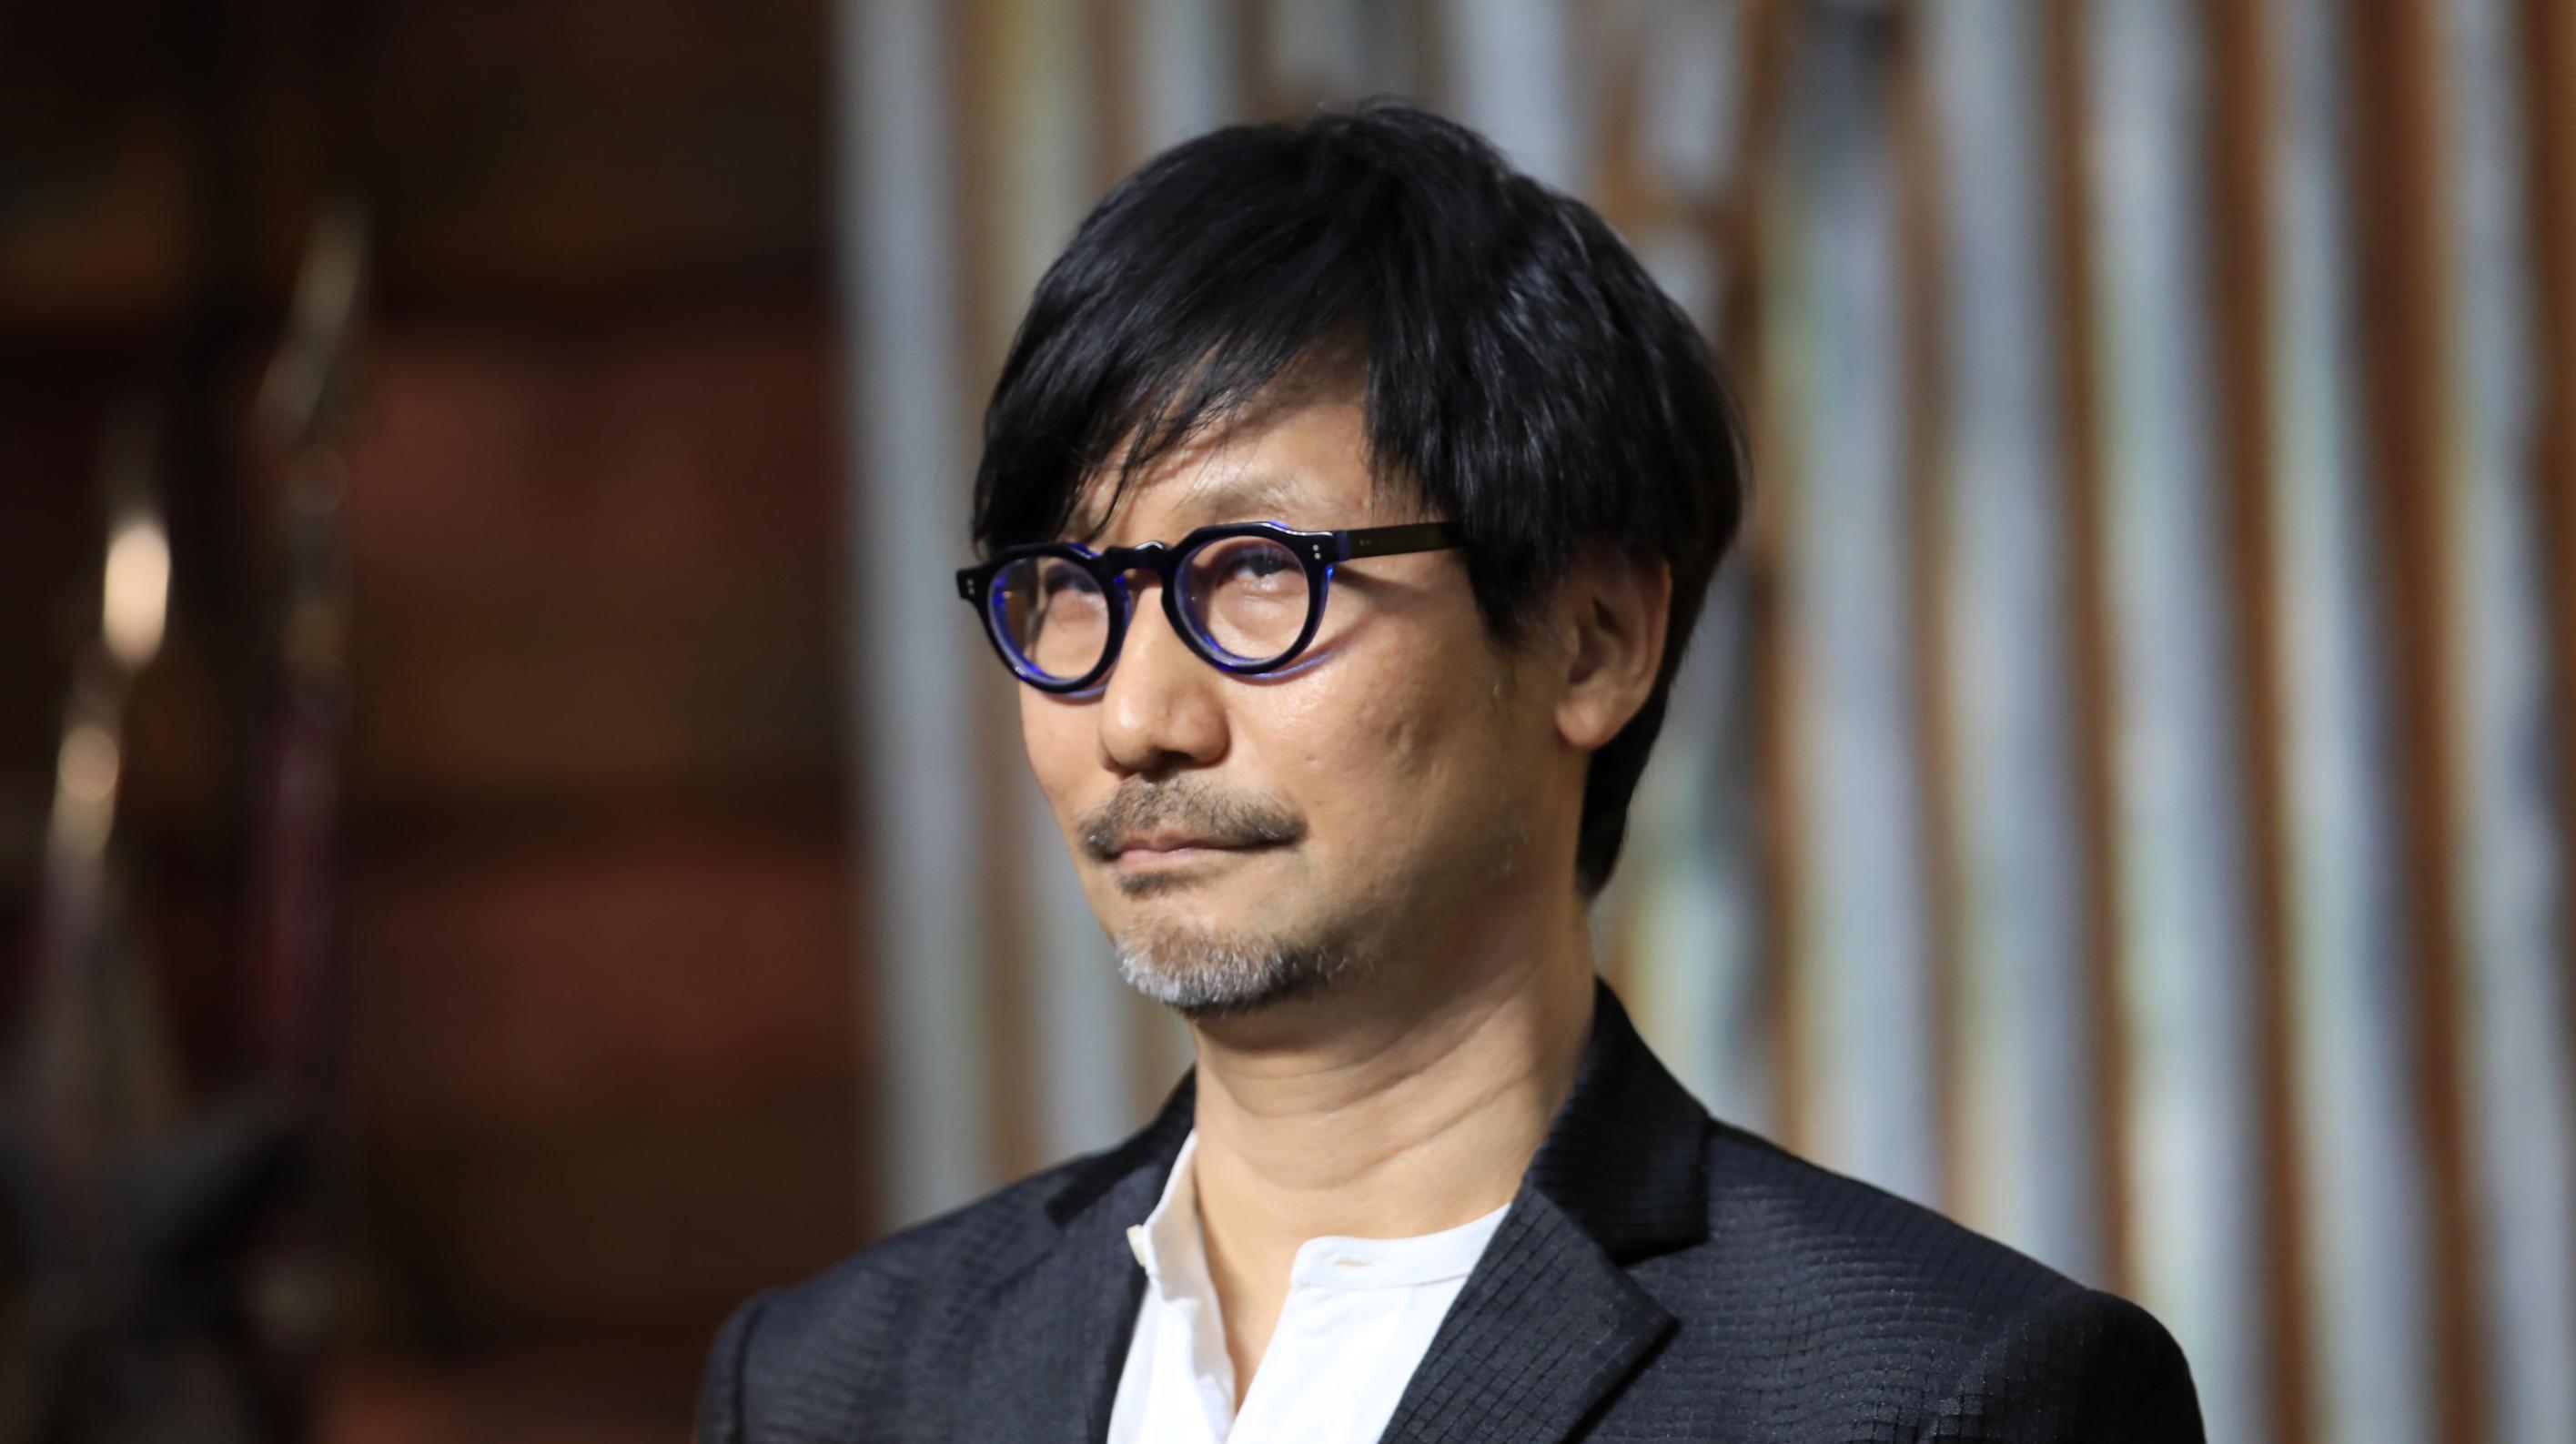 Metal Gear Producer Dreams of Teaming Up with Kojima Again